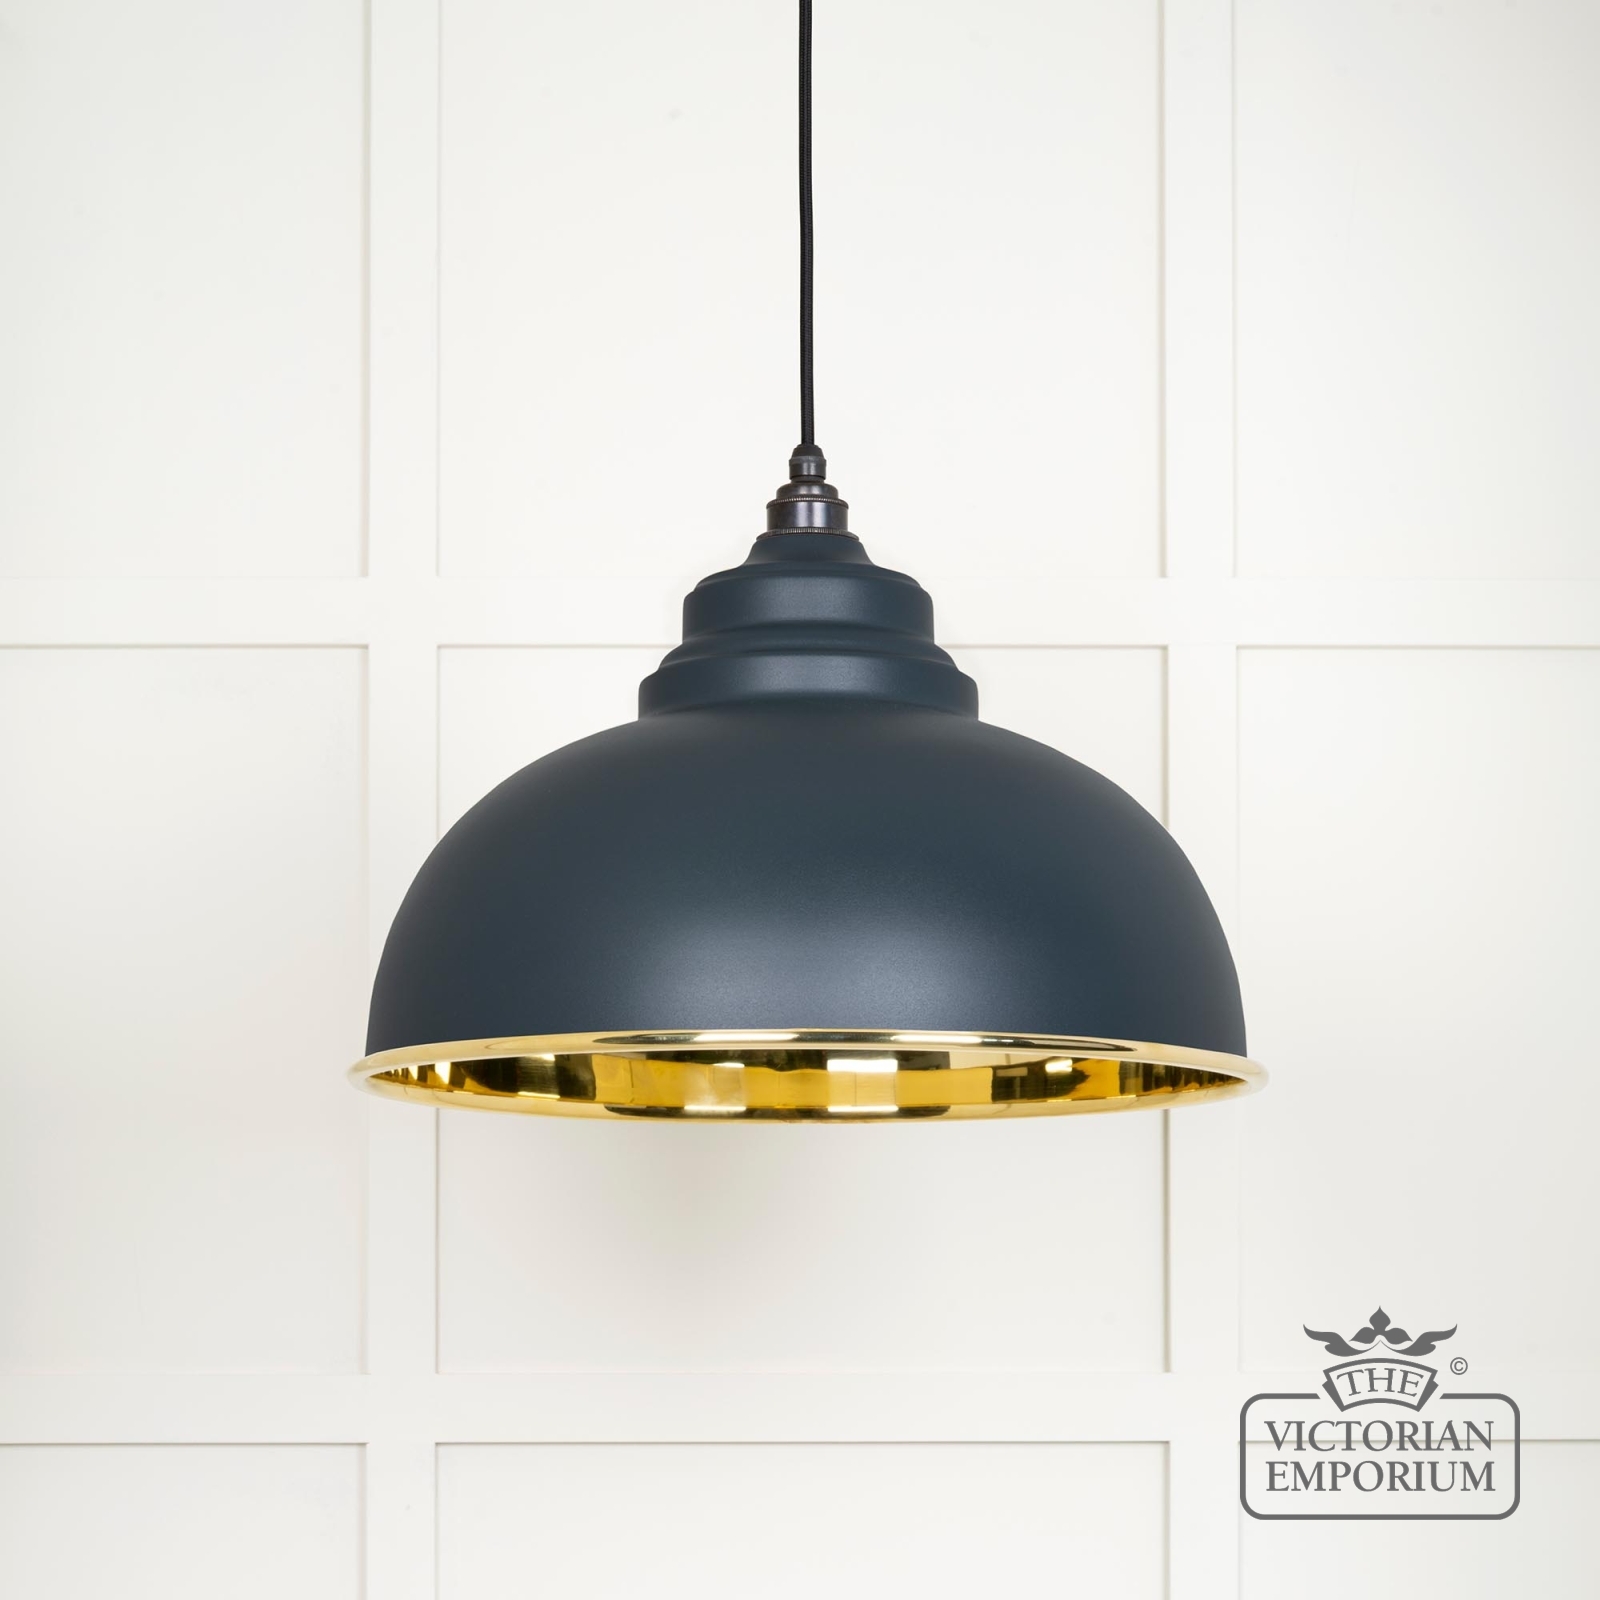 Harlow pendant light in smooth brass with painted Soot exterior